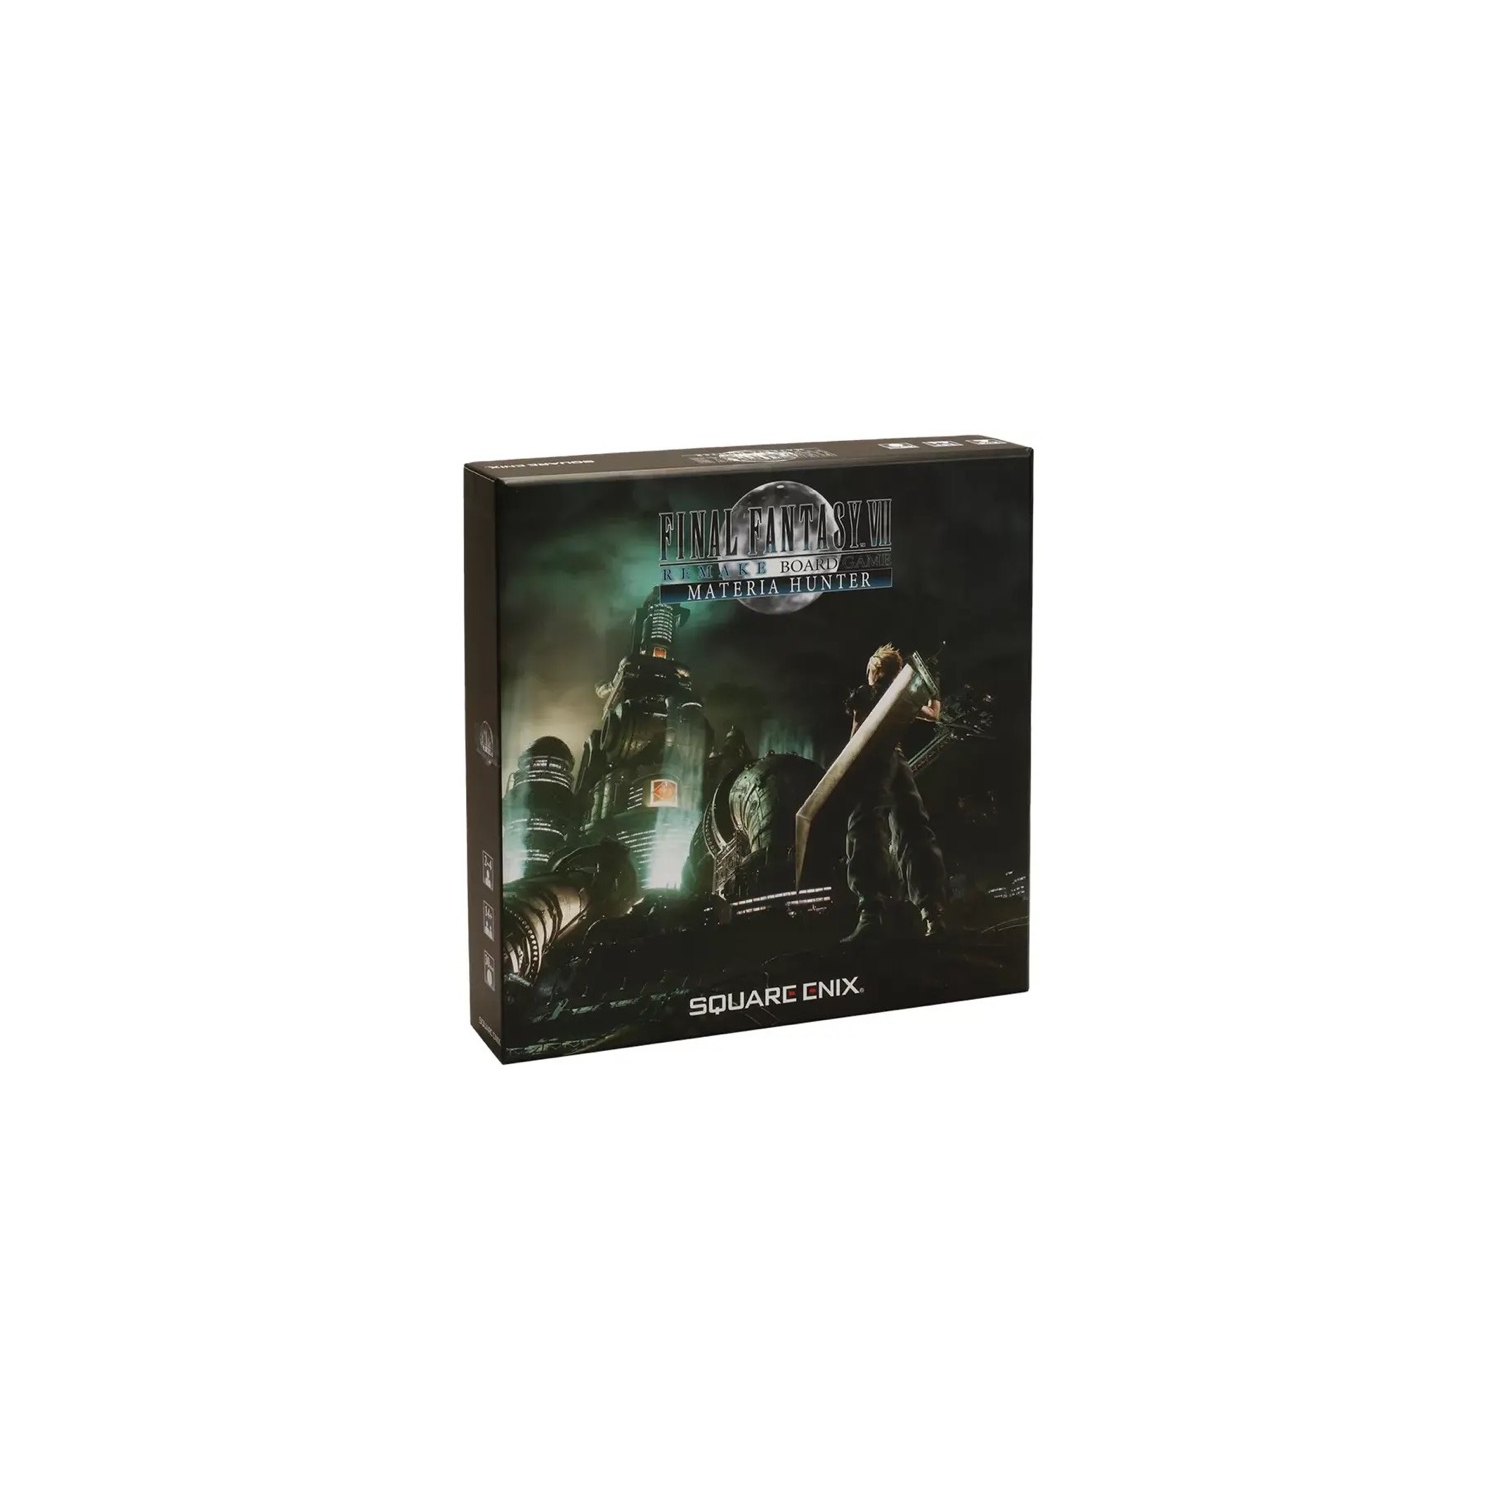 Square Enix Final Fantasy VII Remake Board Game: Materia Hunter 2-4 players, ages 14+, 20-30 minutes